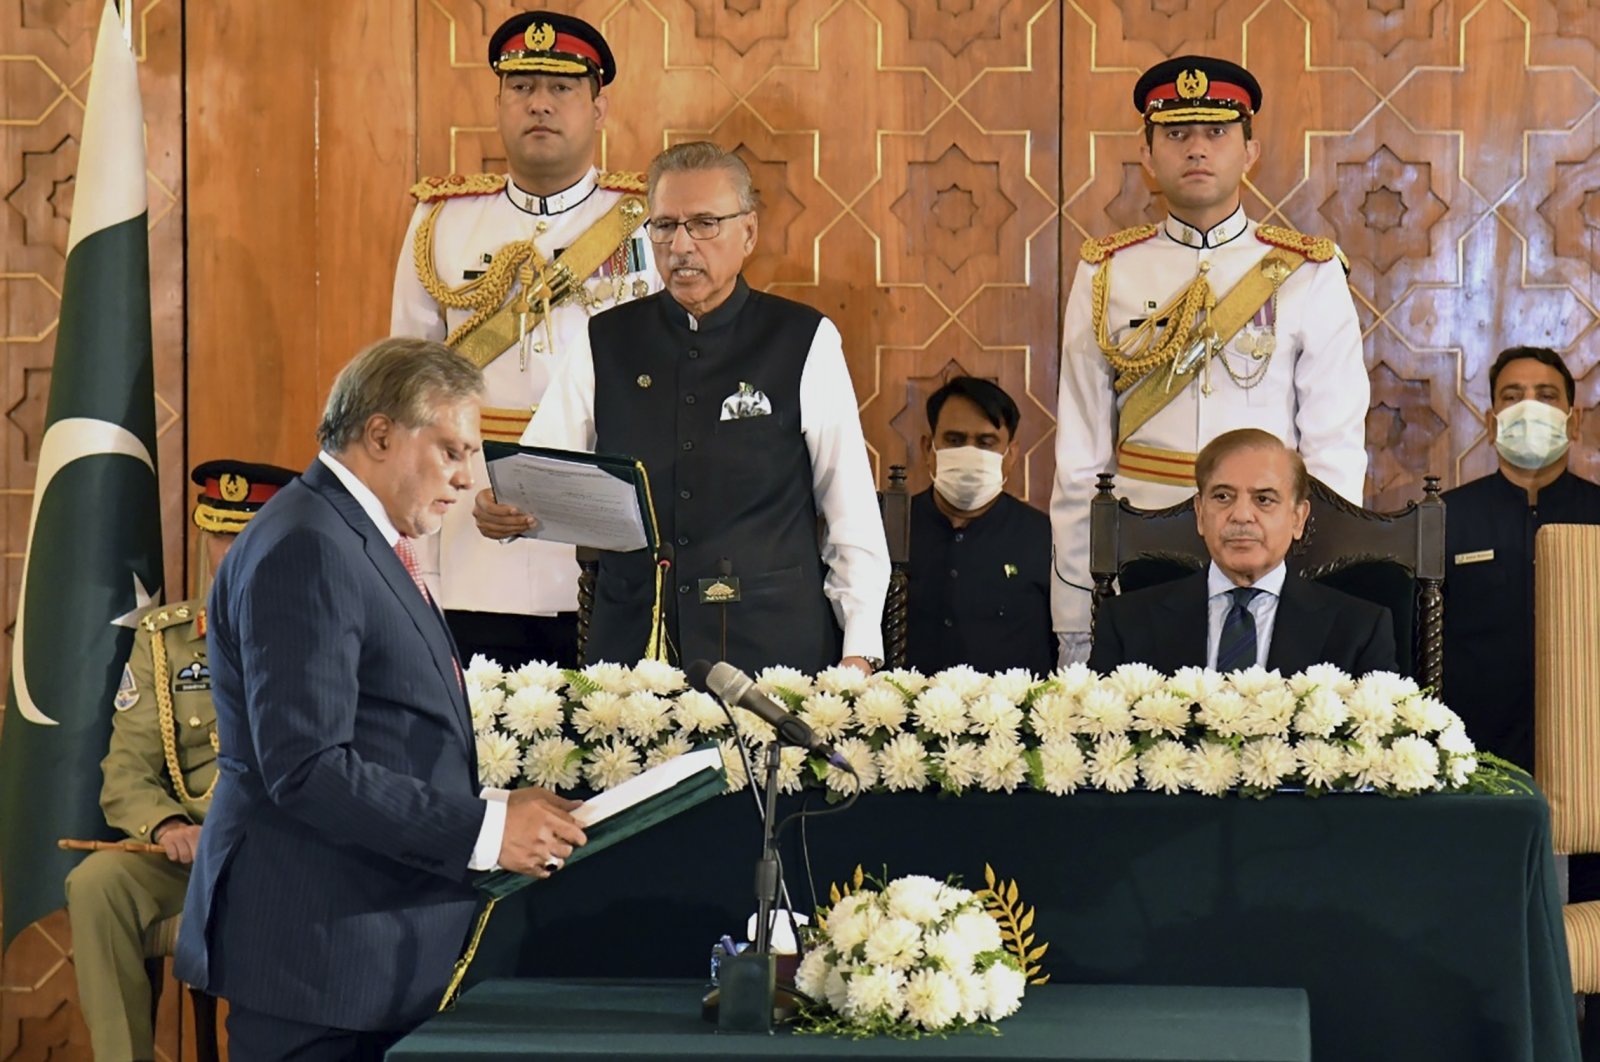 Pakistan&#039;s President Arif Alvi (C) administrates the oath from newly appointed Finance Minister Ishaq Dar (L), as Prime Minister Shahbaz Sharif (R) watches during a ceremony in Islamabad, Pakistan, Sept. 28, 2022. (Press Information Department via AP)